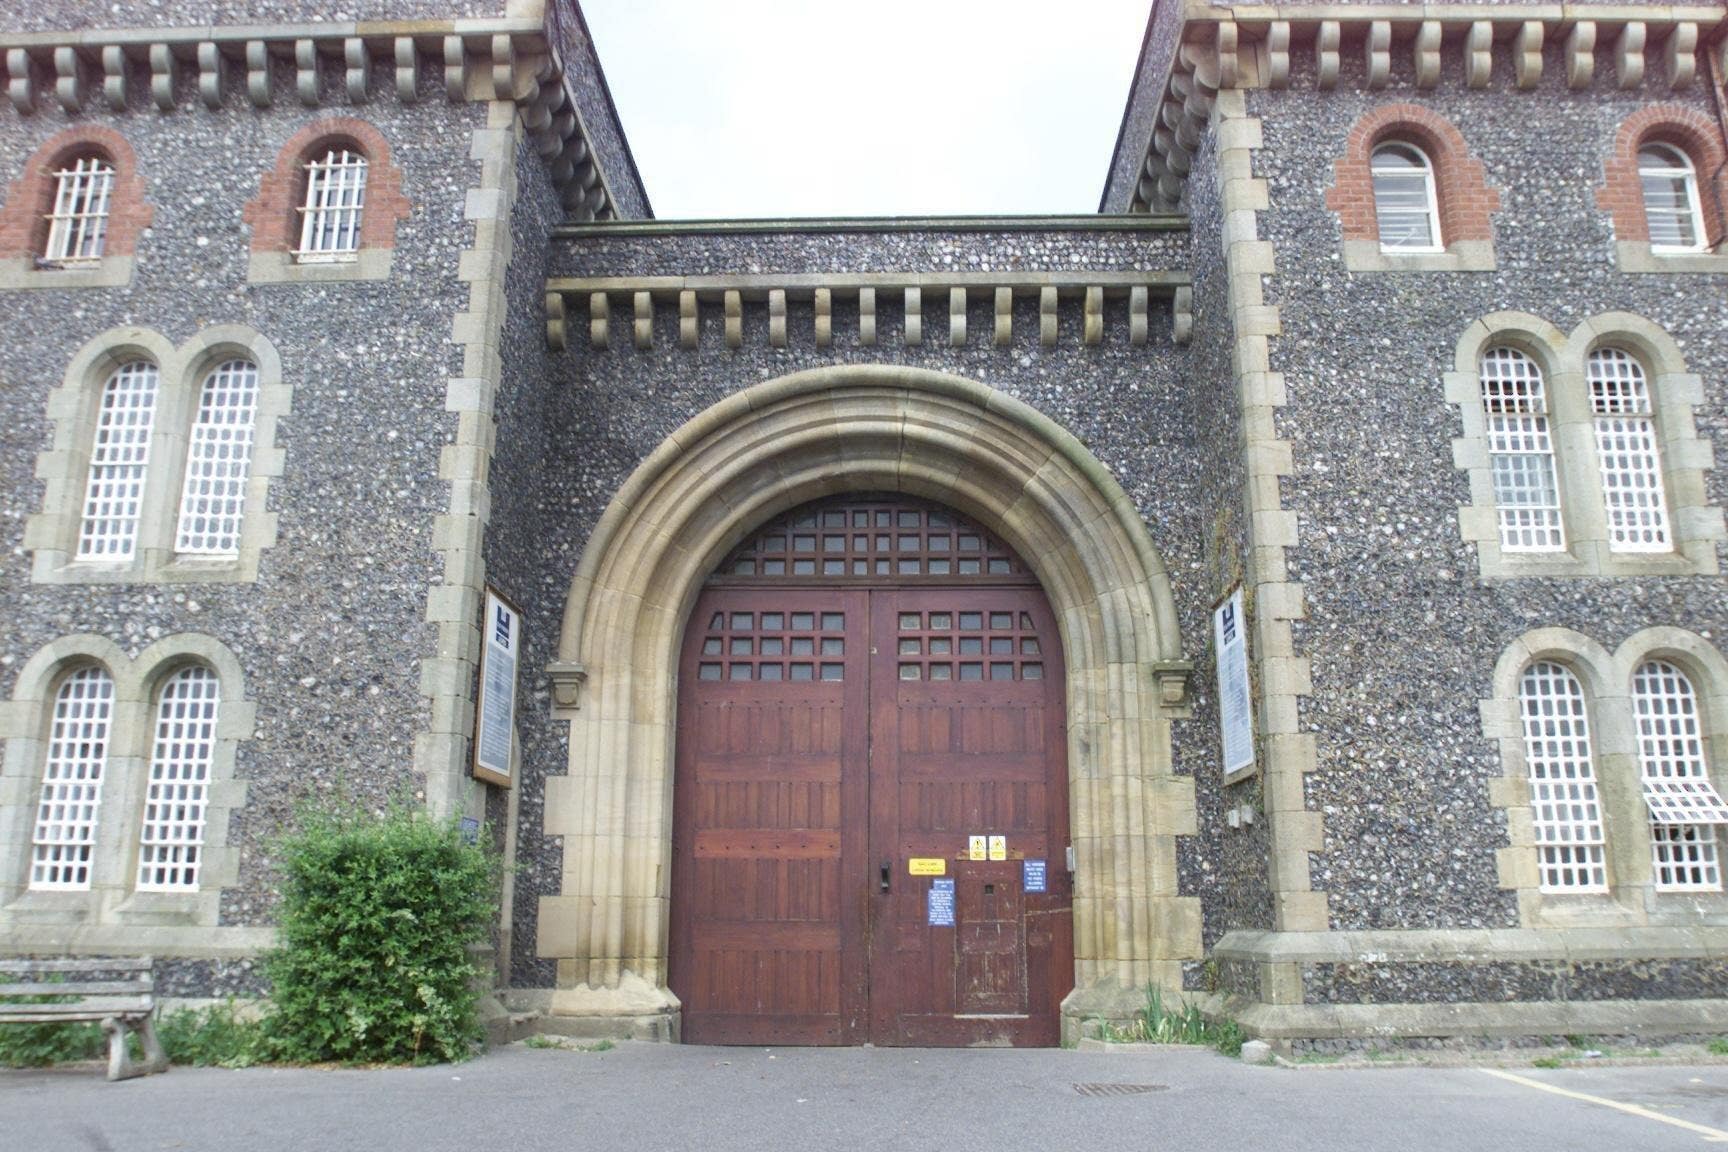 Inspectors found rising violence, self-harm, drugs and a churn of men caught in a cycle of homelessness and offending at HMP Lewes